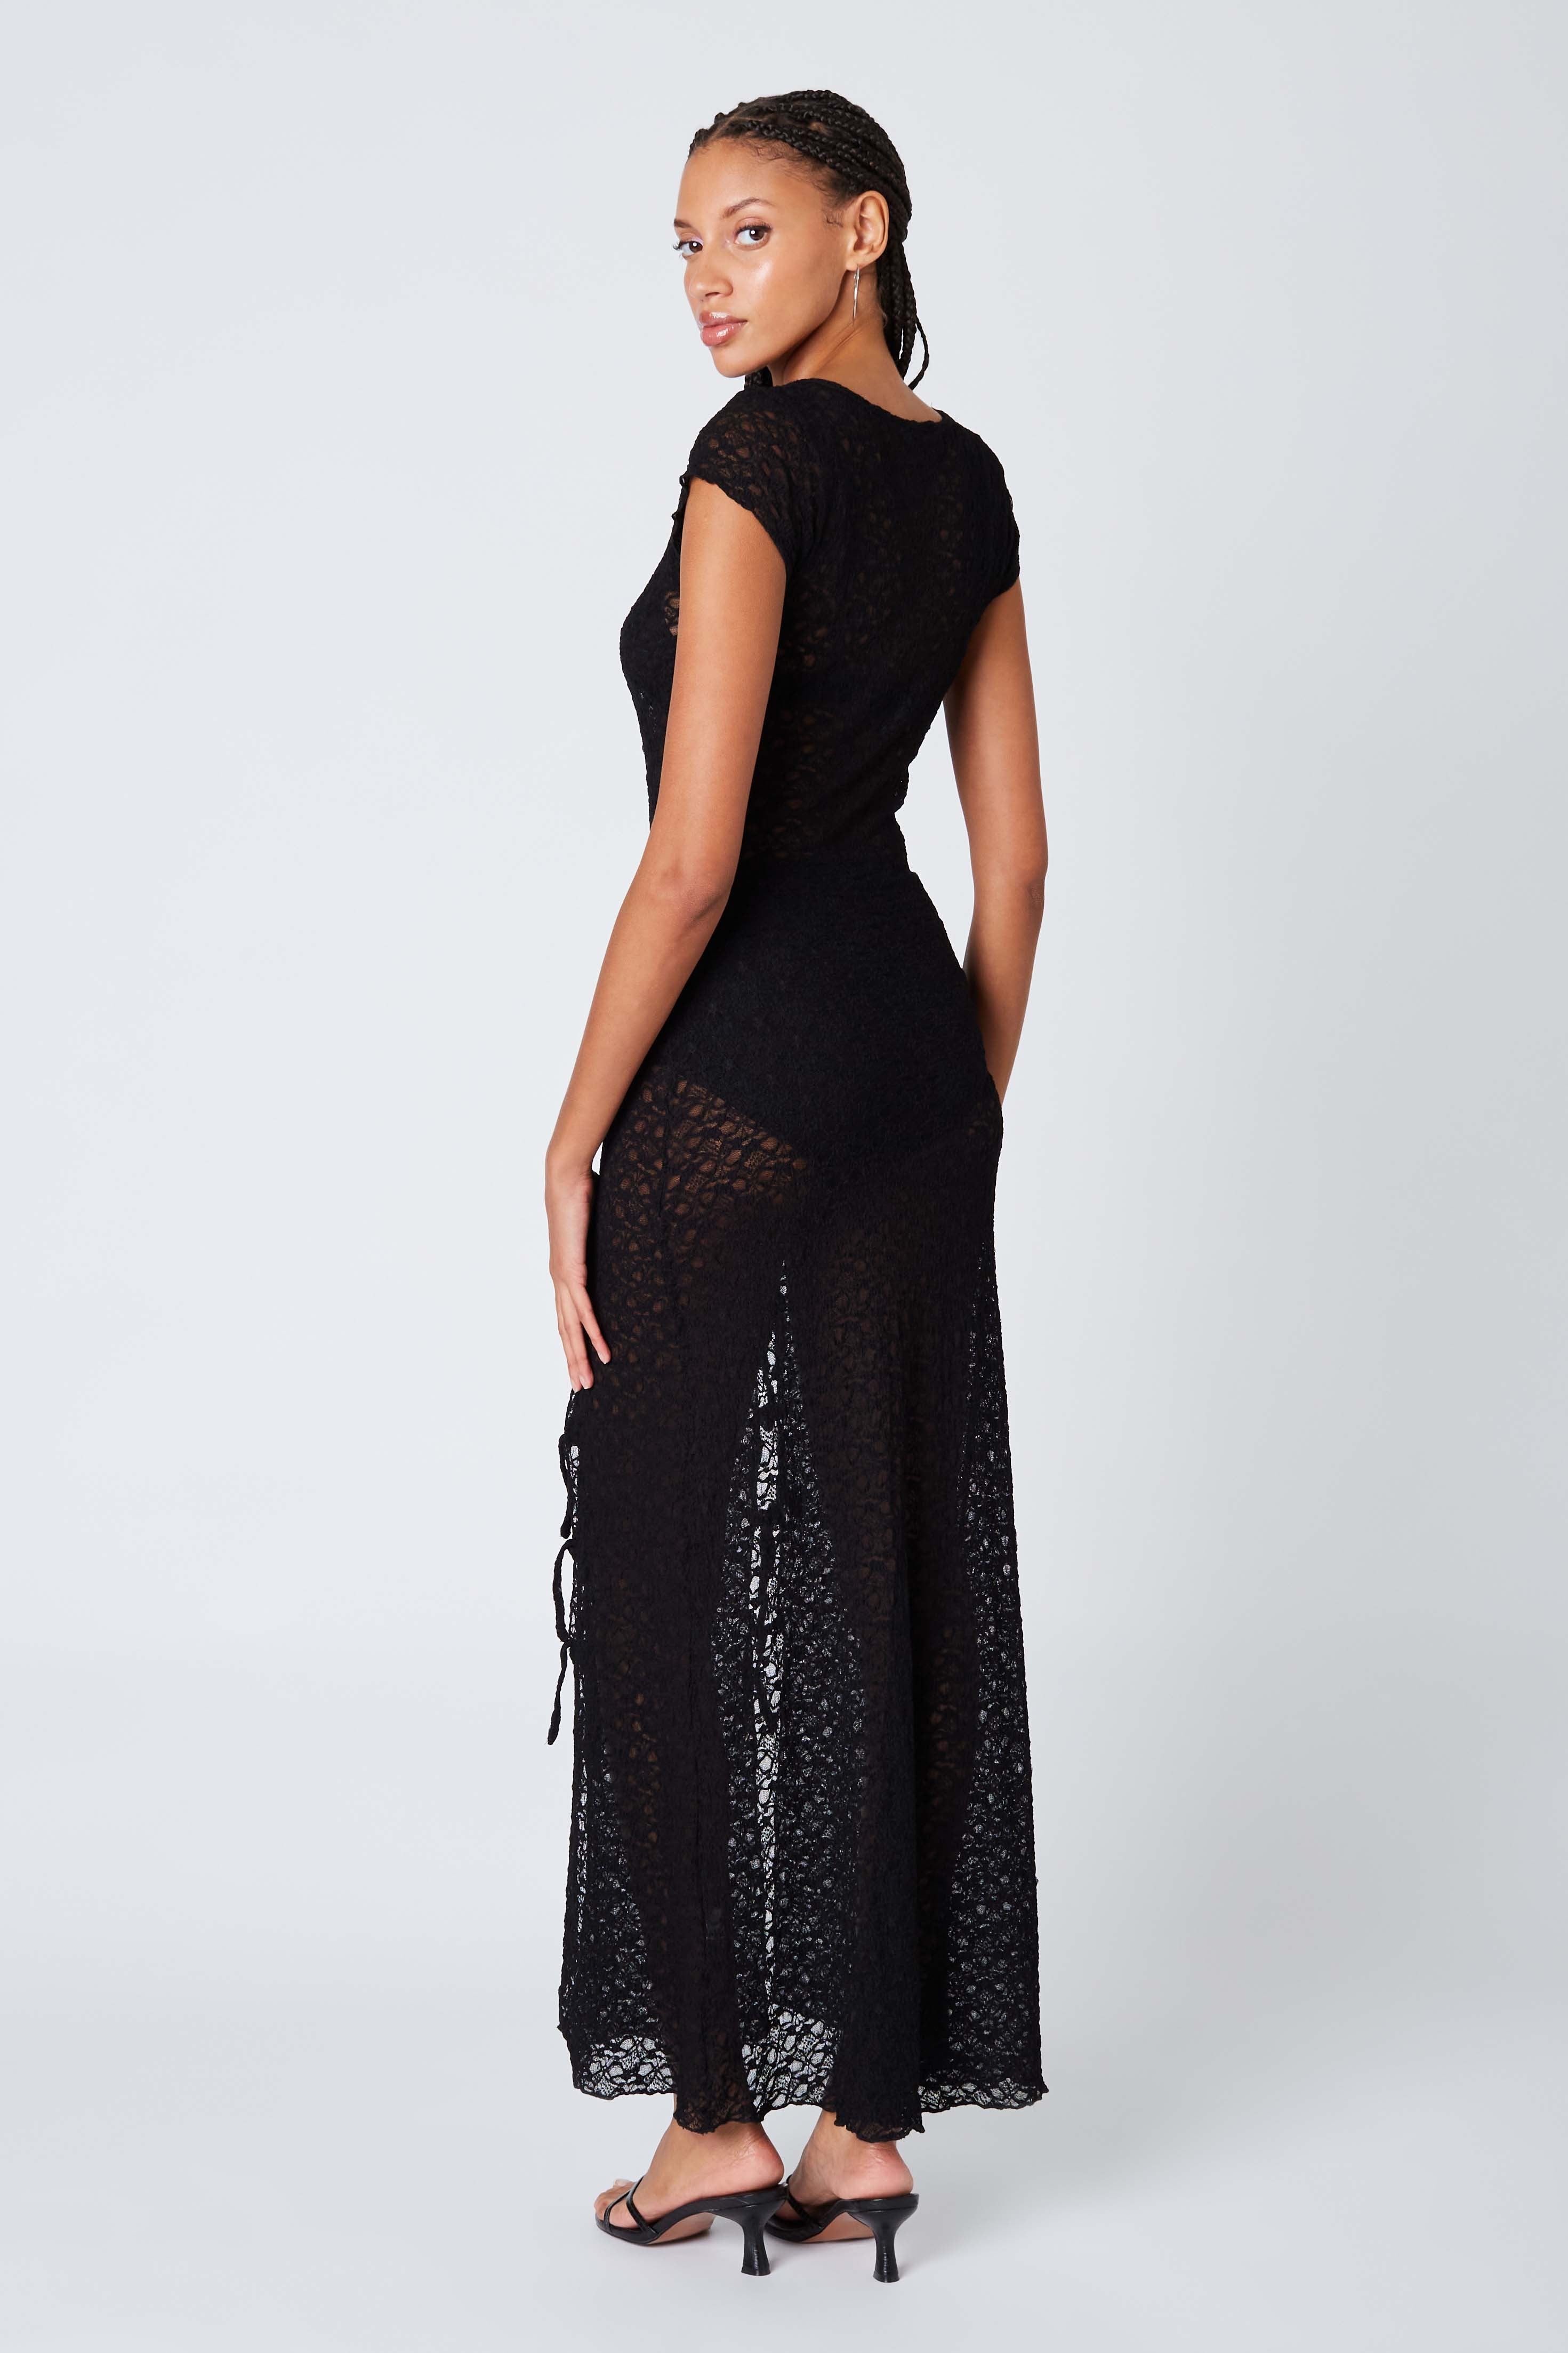 Black Lace See Through Maxi Dress | Collective Request 